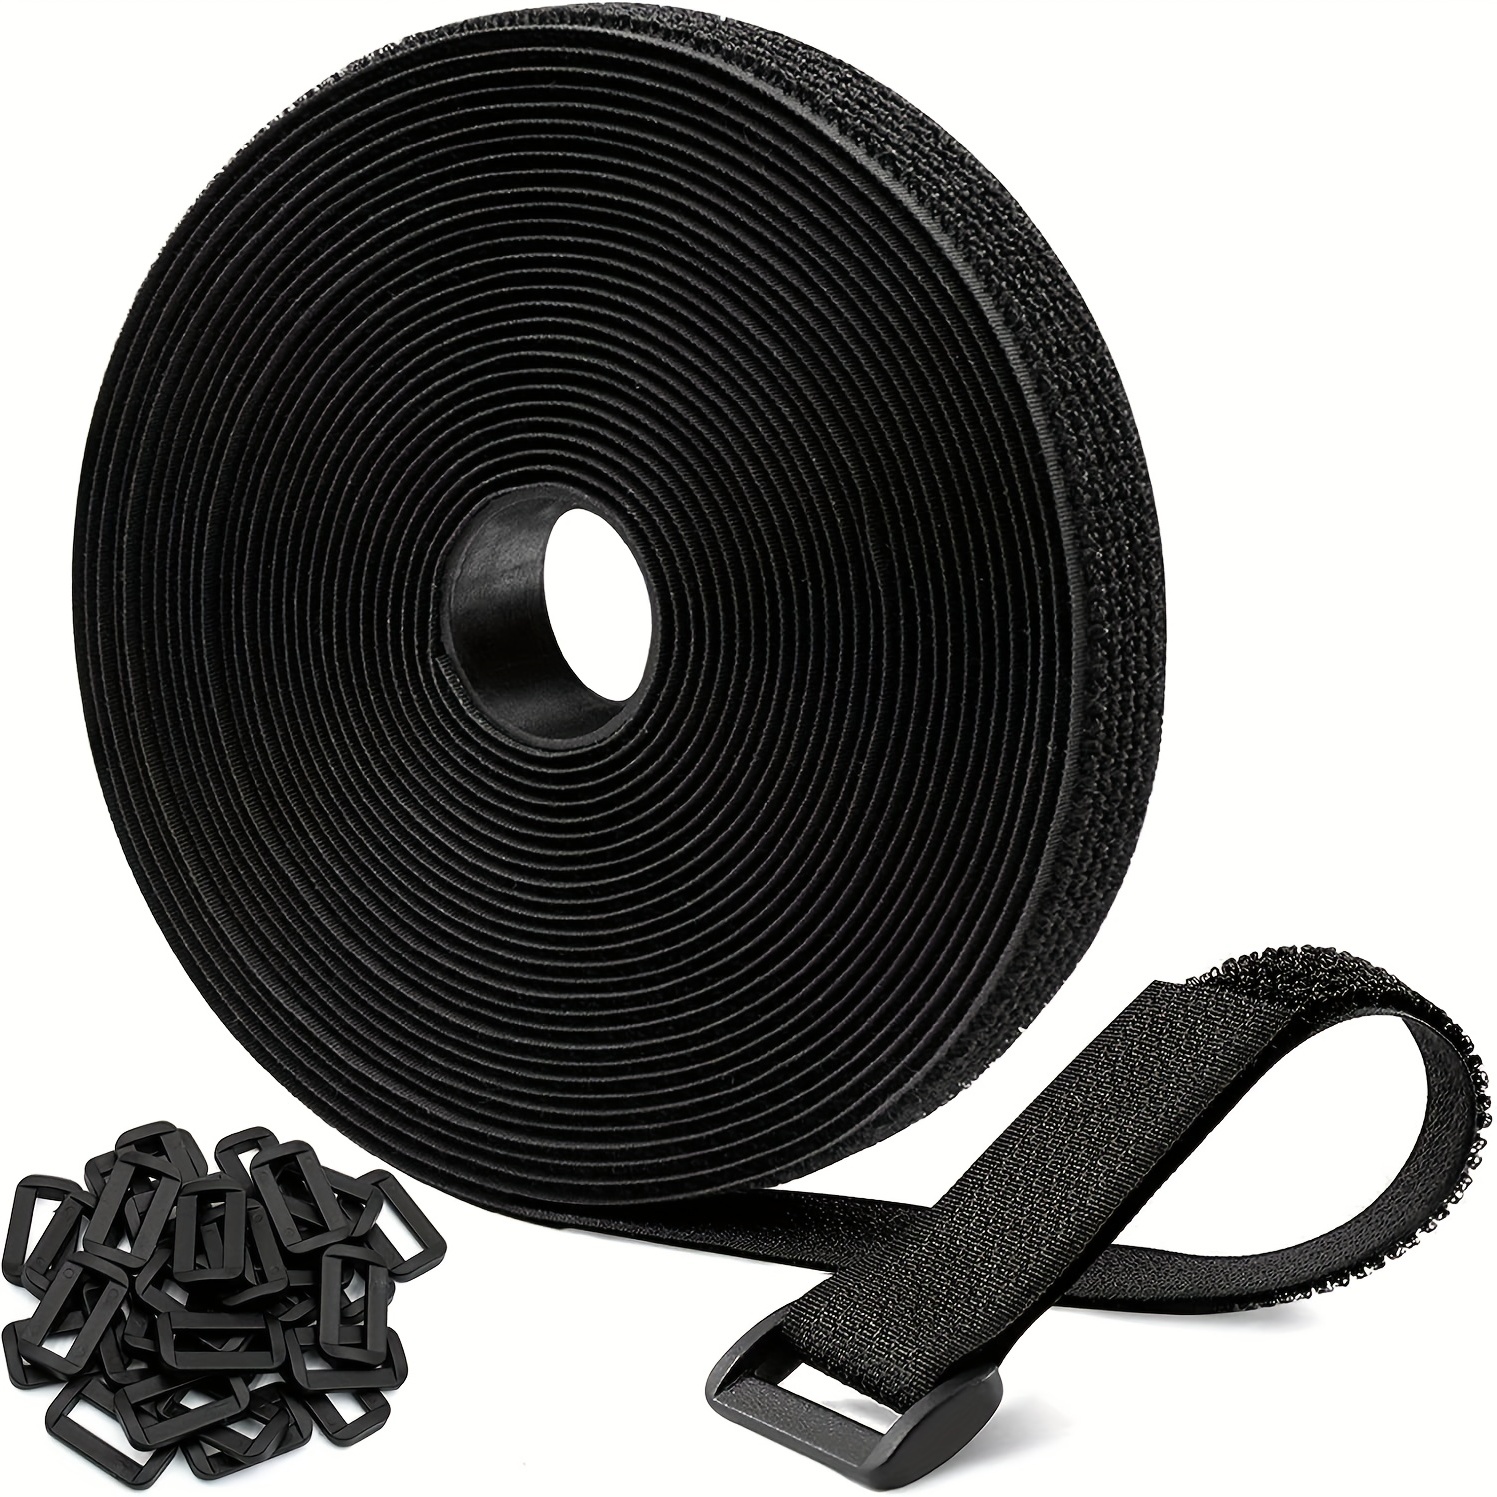 Bundle Of 5 -6 ft nylon strap w/adjuster buckle Tie Strapping versatile